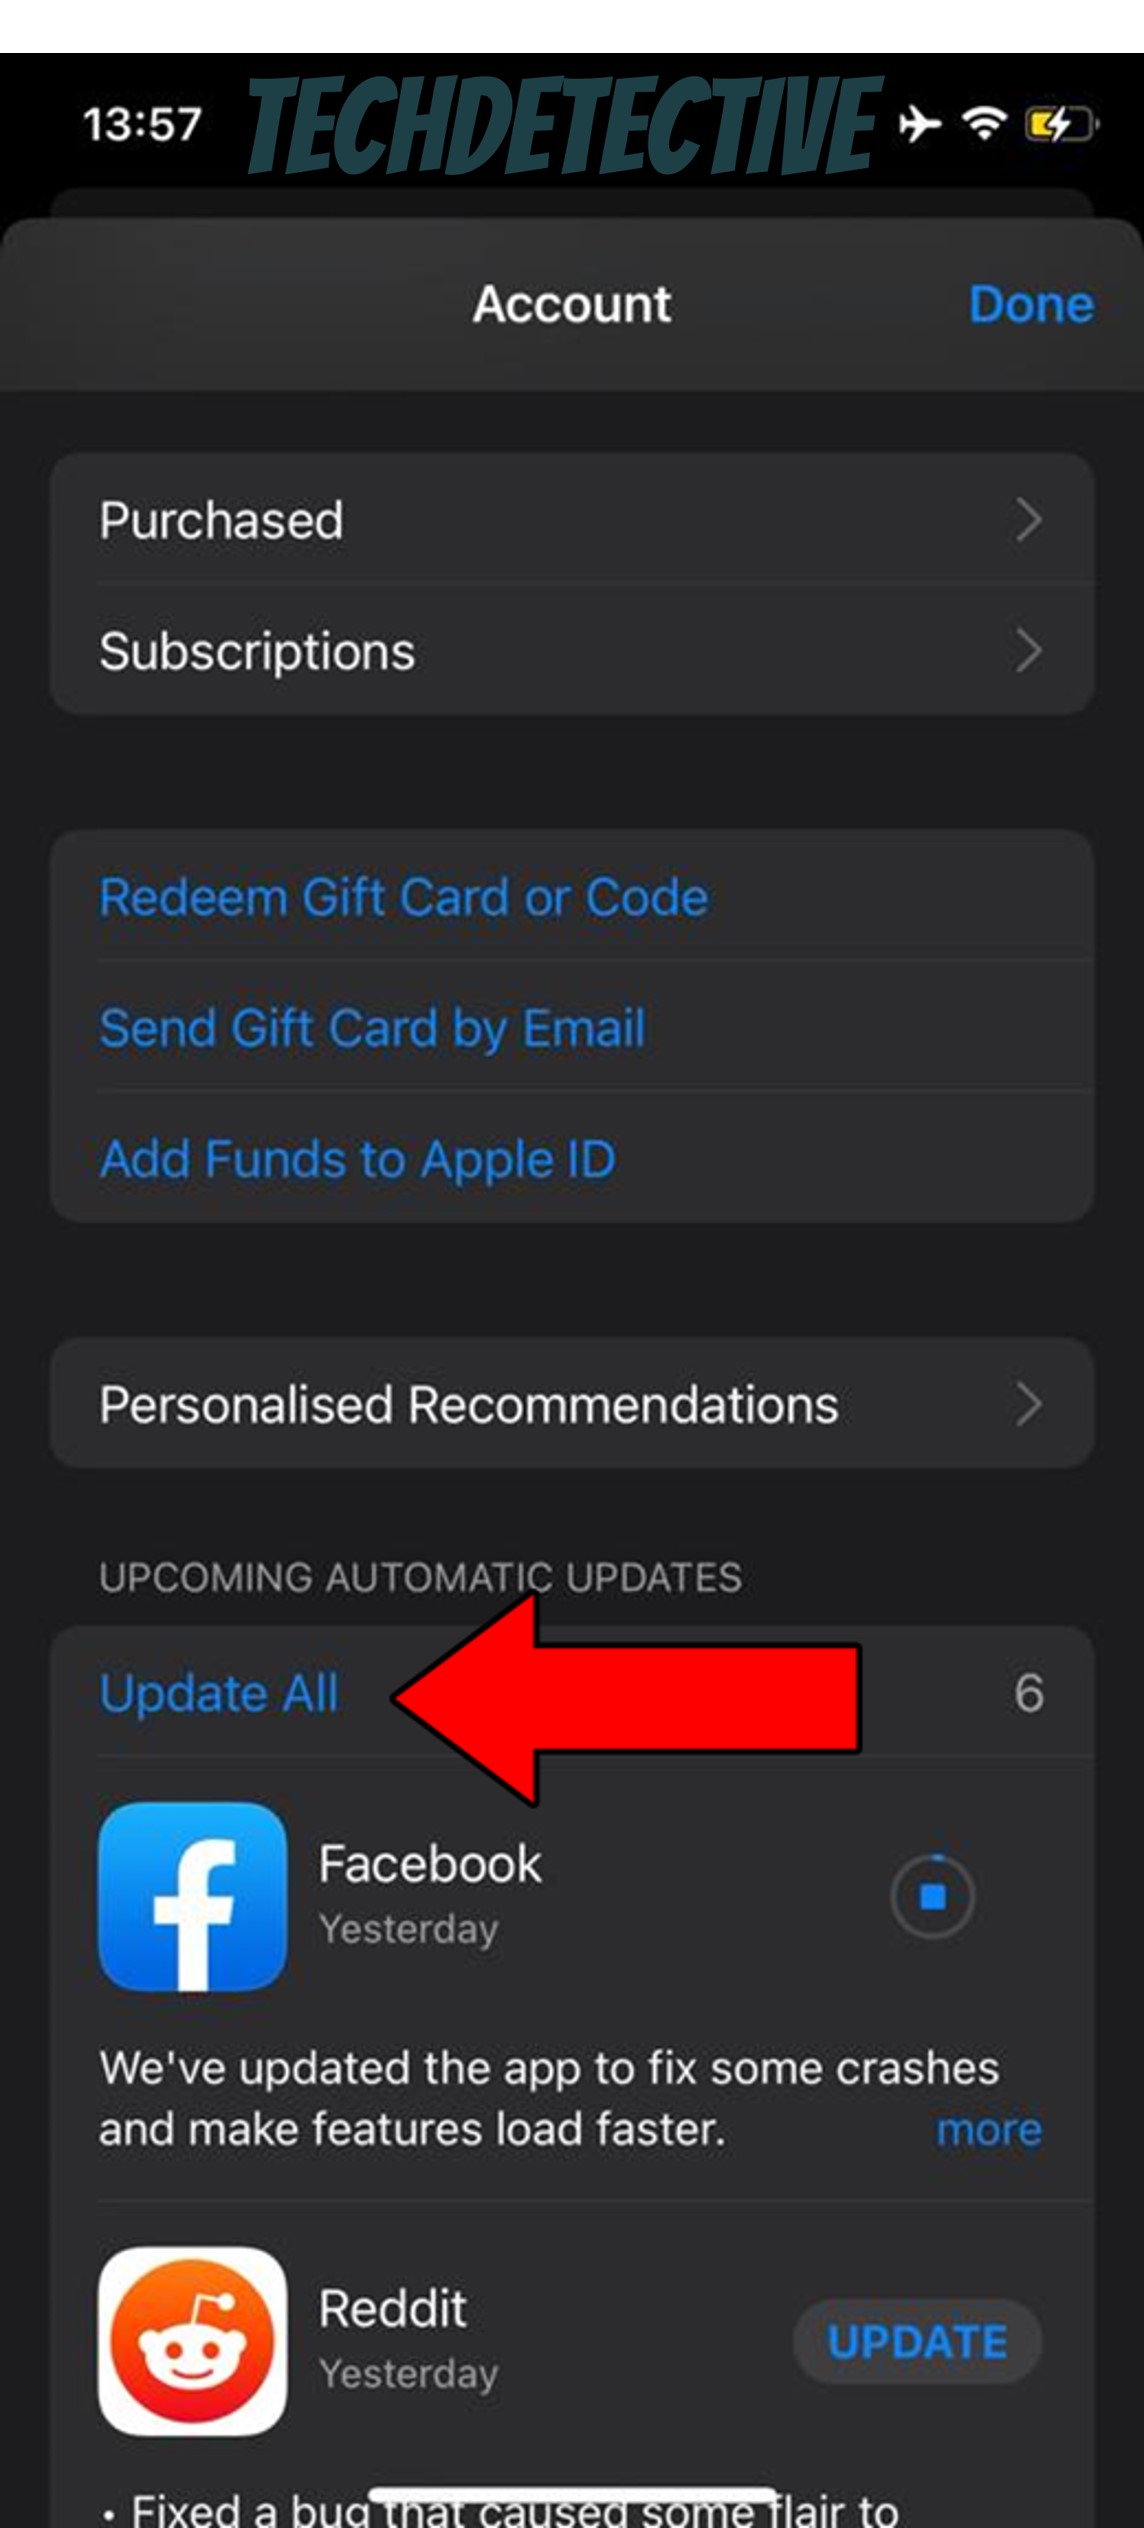 How to update all apps on iOS